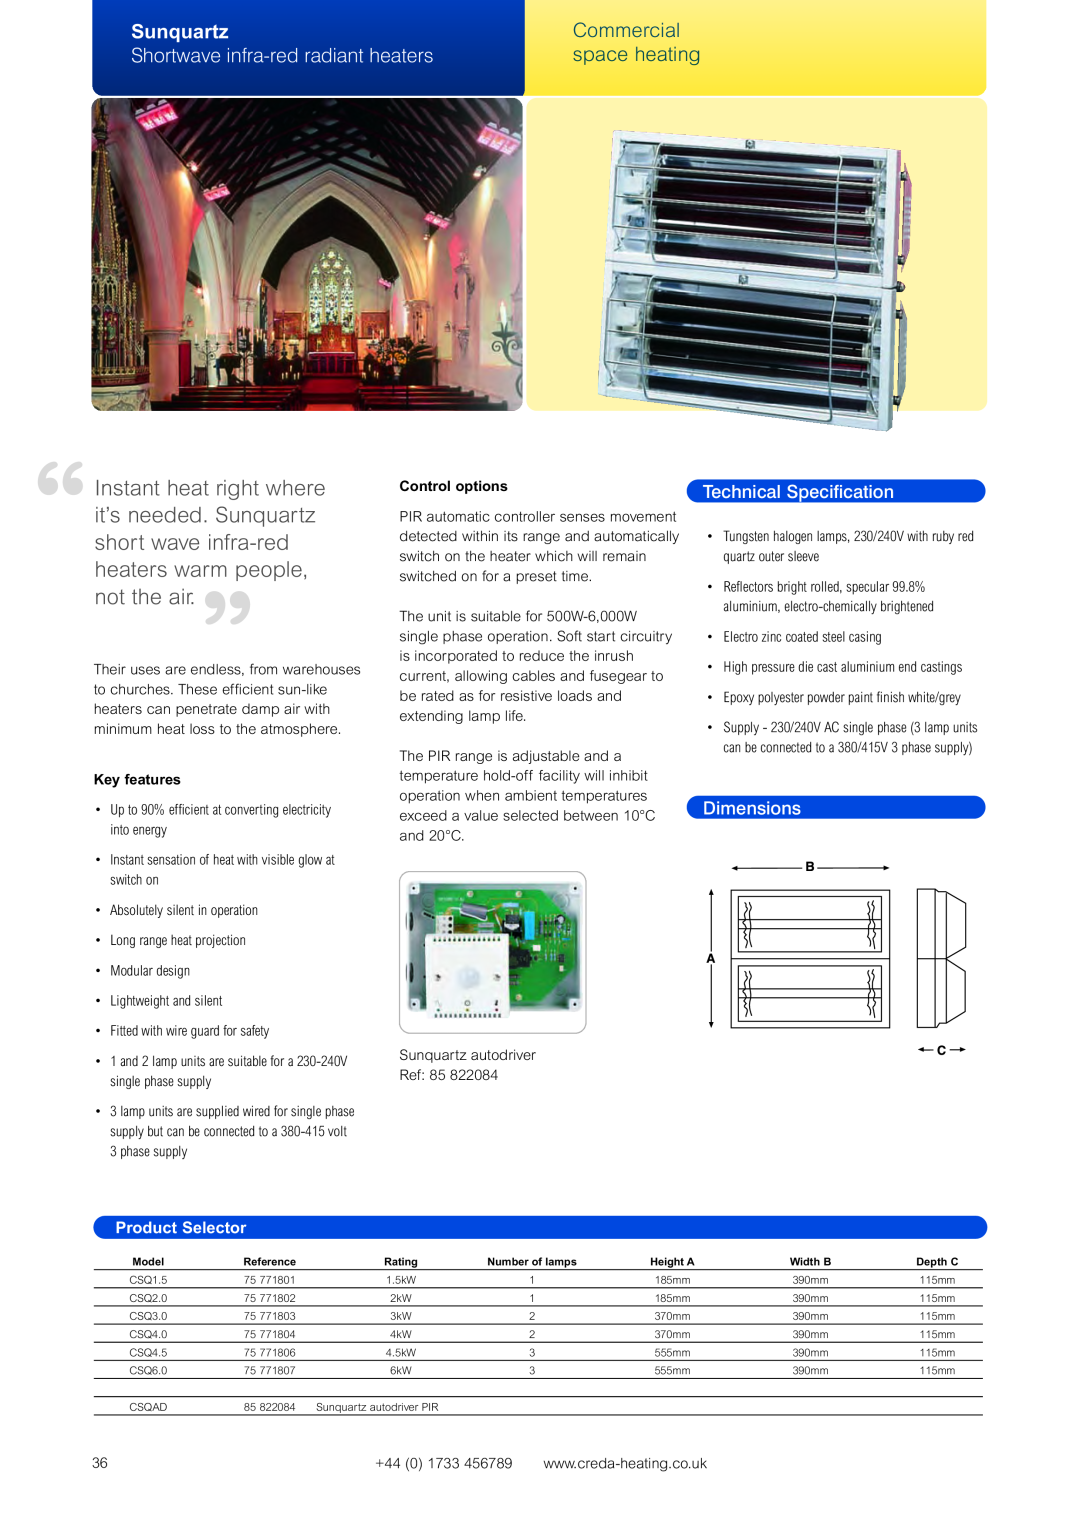 Signat CSQAD, CSP2 Sunquartz, Commercial, Shortwave infra-red radiant heaters, space heating, Technical Specification 